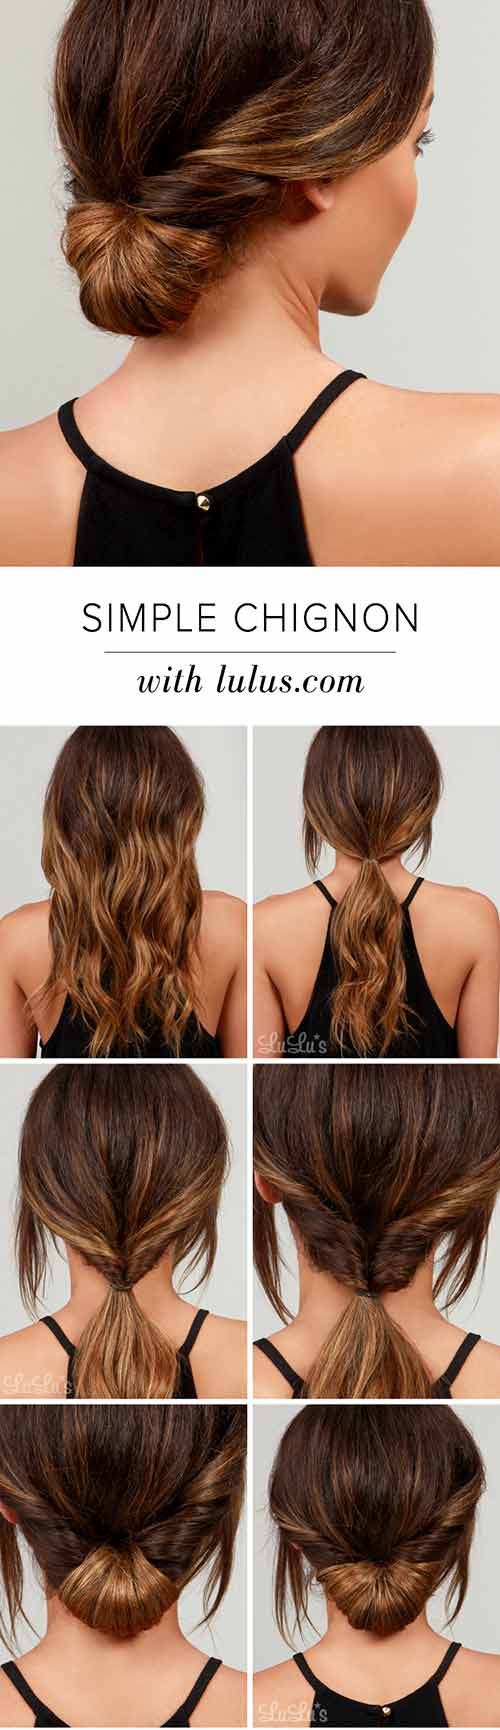 Simple Chignon.(SIMPLE) Hairstyle For Long Hair Girls